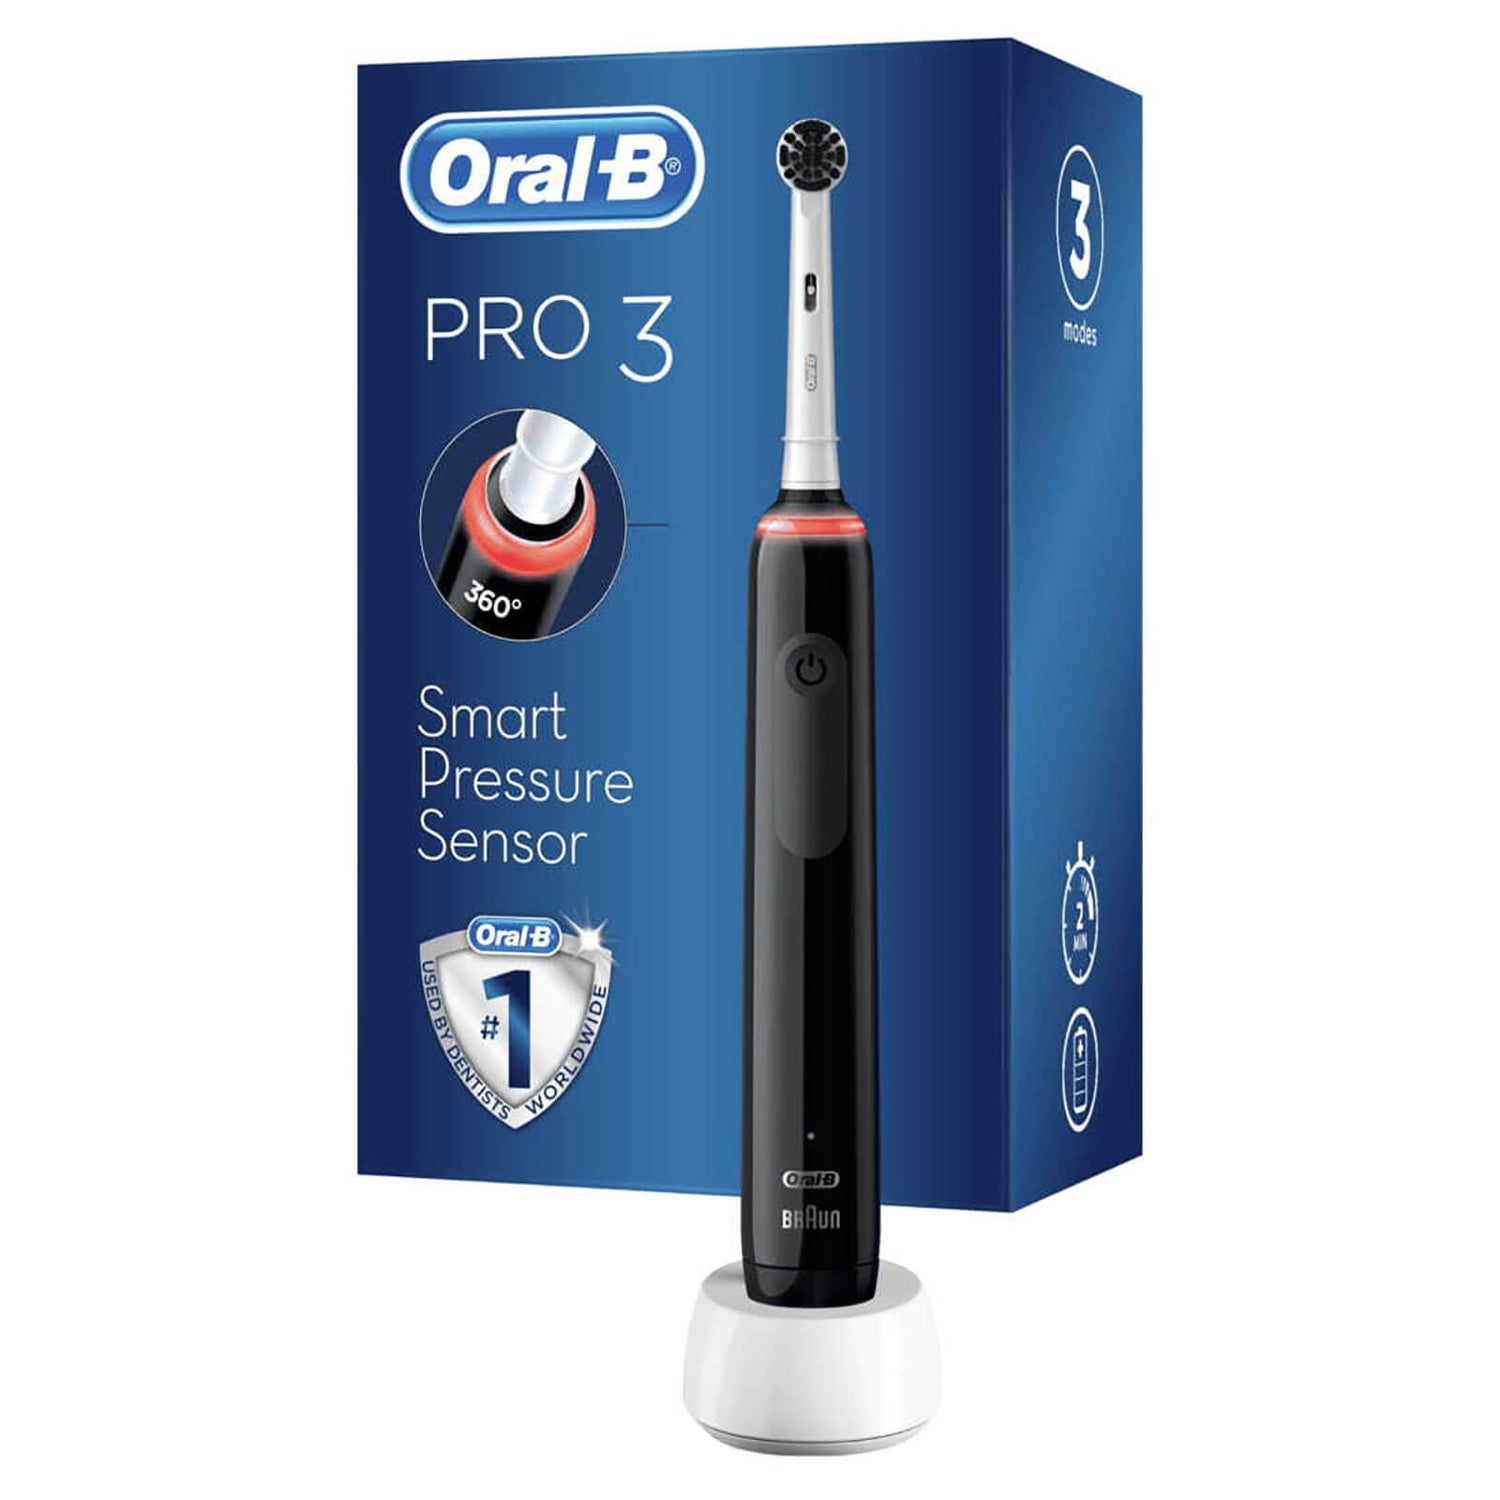 Oral B Pro 3000 - Black Electric Toothbrush with Charcoal Infused Bristles